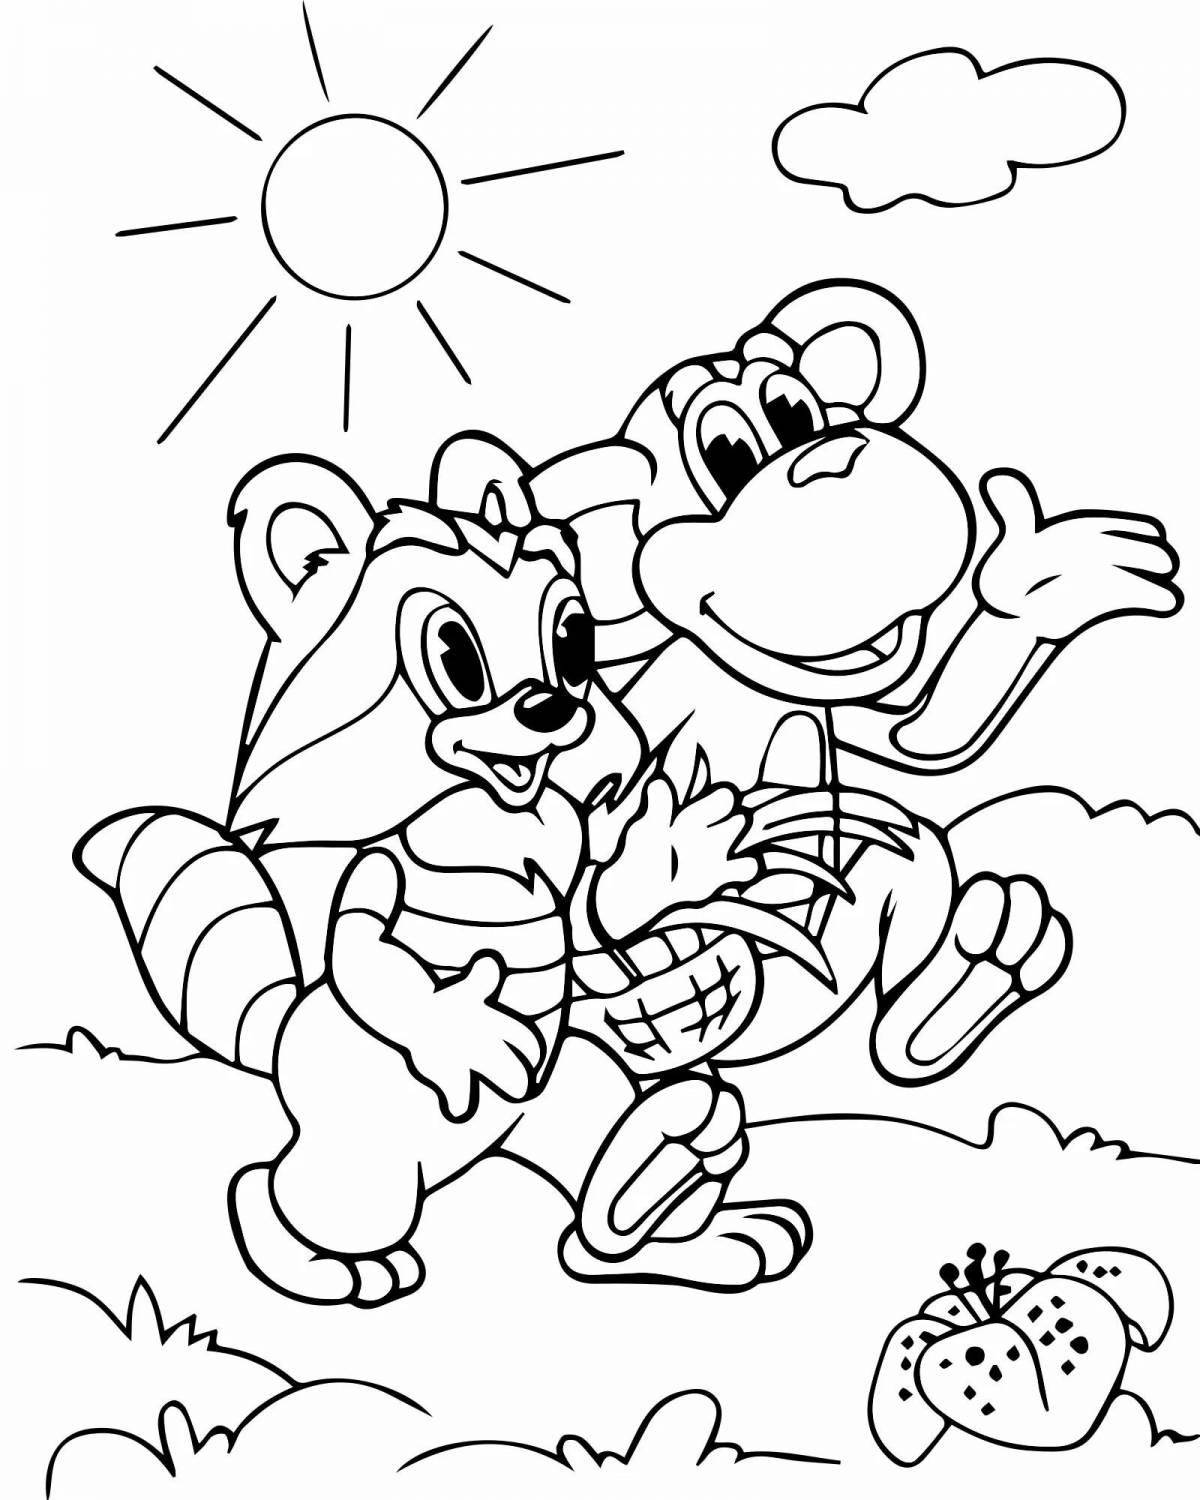 Creative Coloring Pages for Toddlers Archive